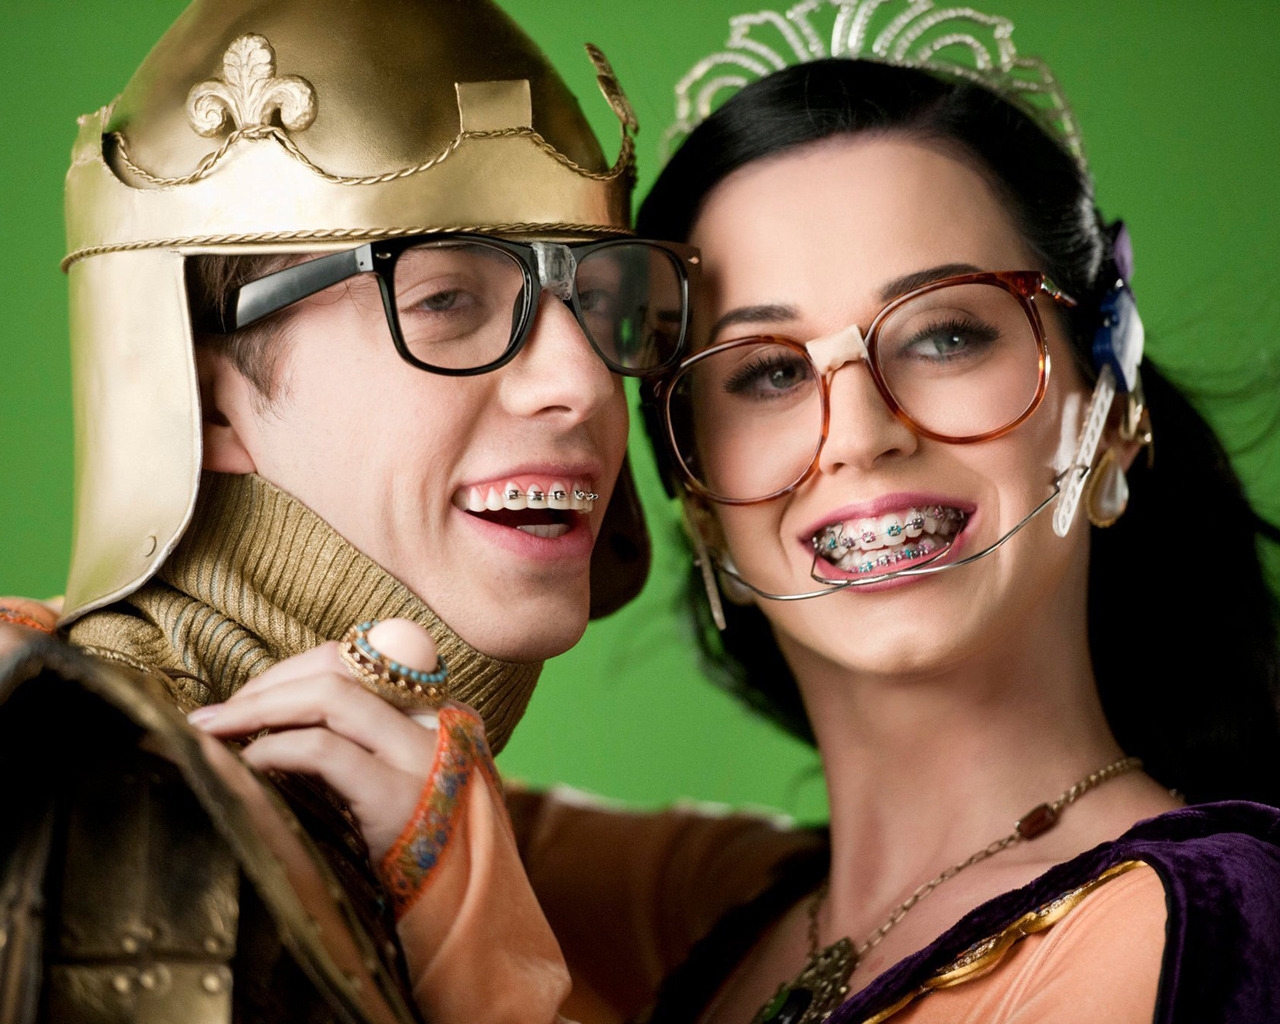 Really Funny Katy Perry for 1280 x 1024 resolution